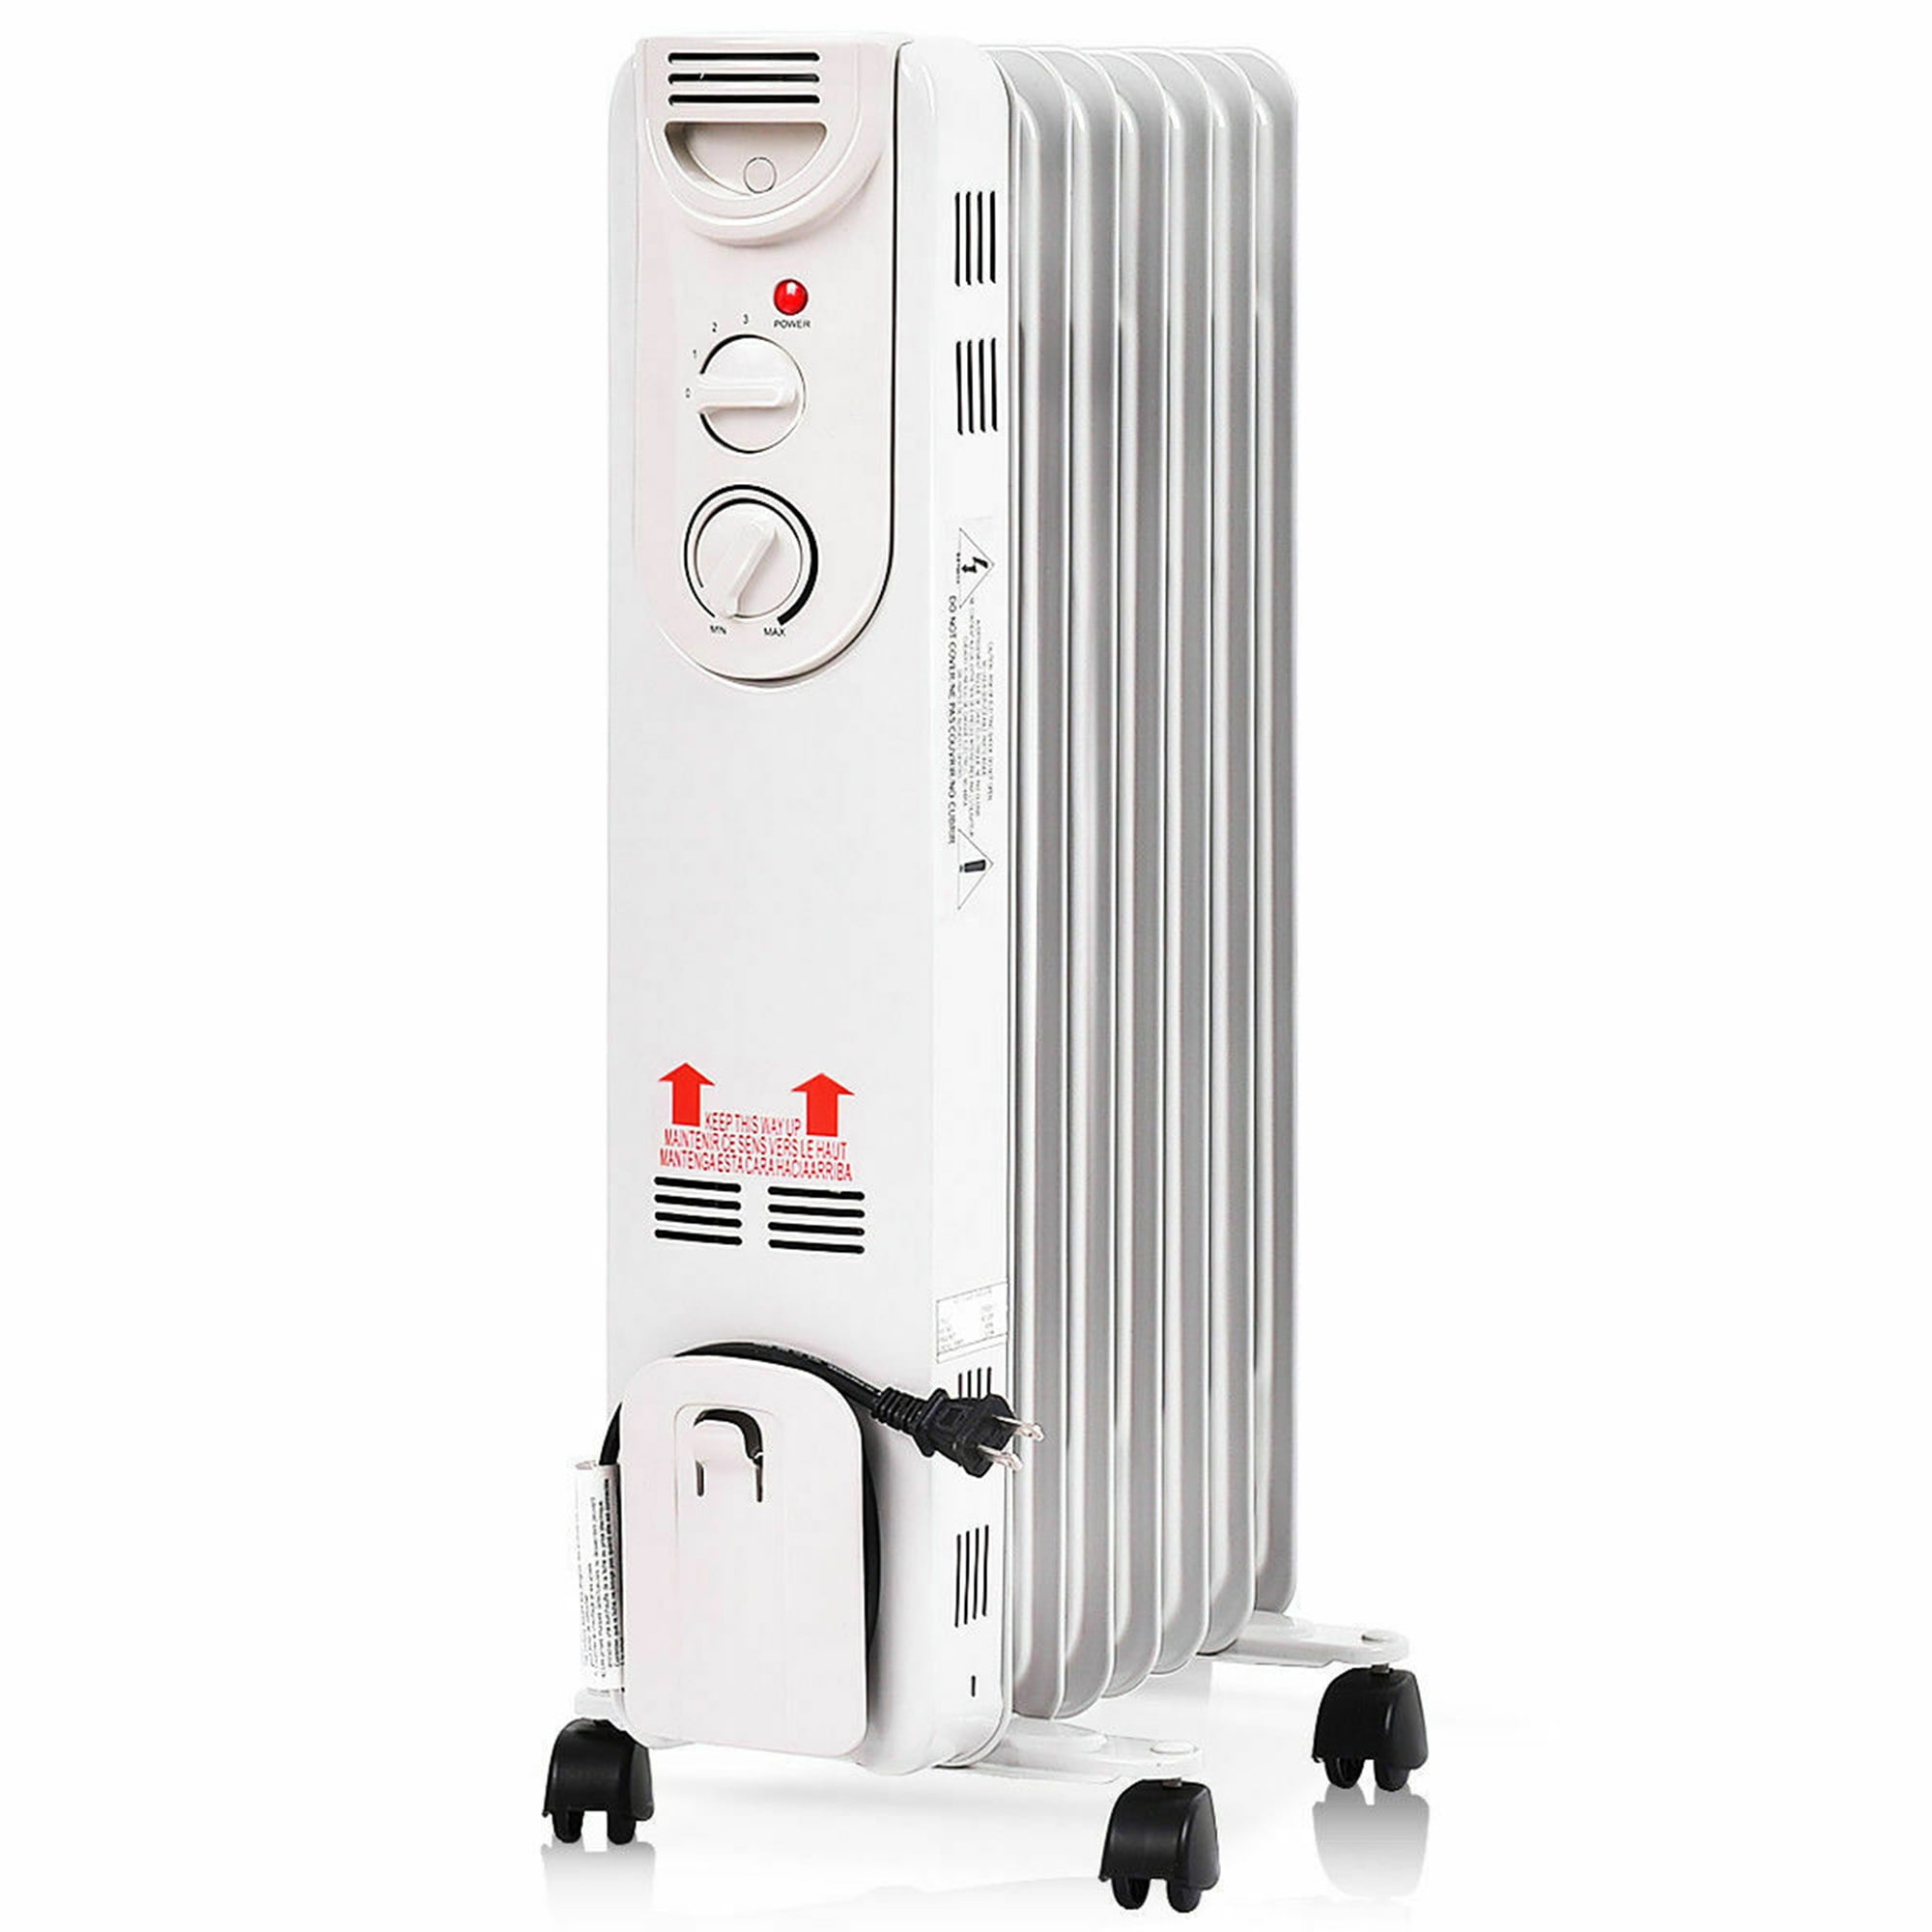 White 2000 W Electric Heater with 3 Heat Settings Overheat Protection Adjustable Thermostat Igenix IG2600 Portable Oil Filled Radiator